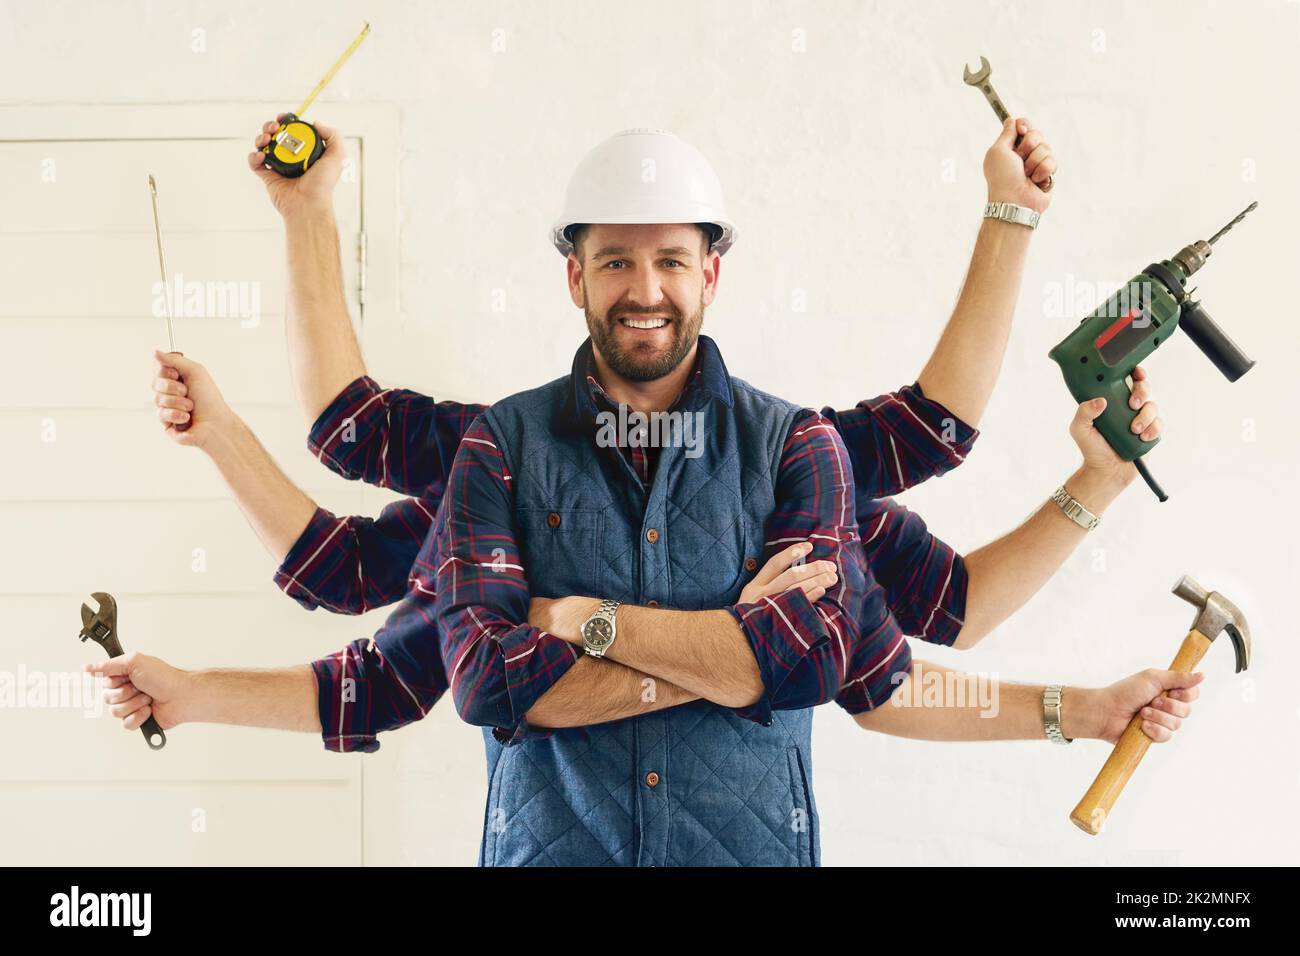 Hes got all the tools youll need. Portrait of a handsome young handyman tools in multiple hands. Stock Photo